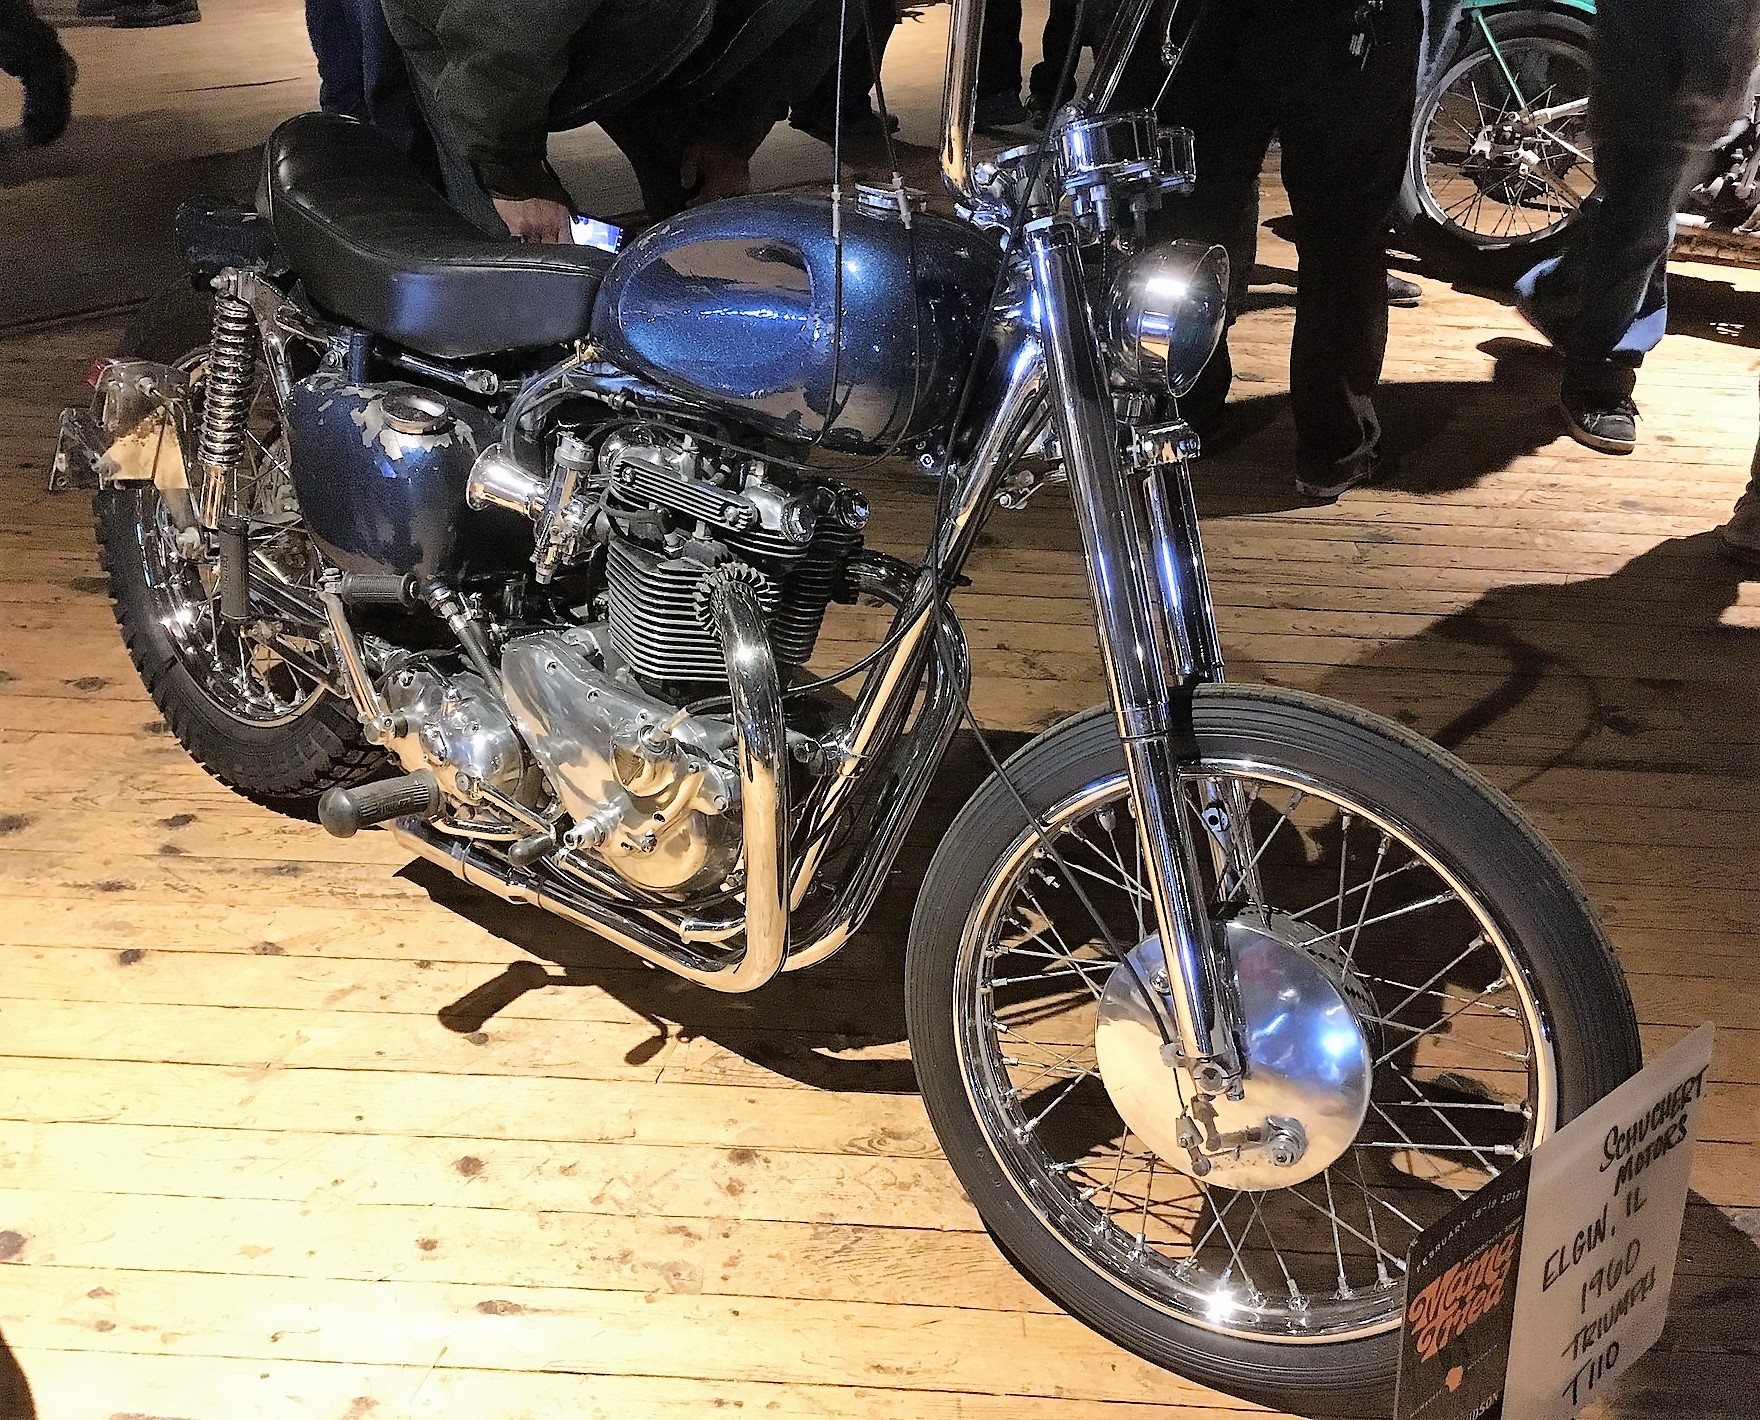 , Mama Tried – and succeeds – at being a unique motorcycle show, ClassicCars.com Journal